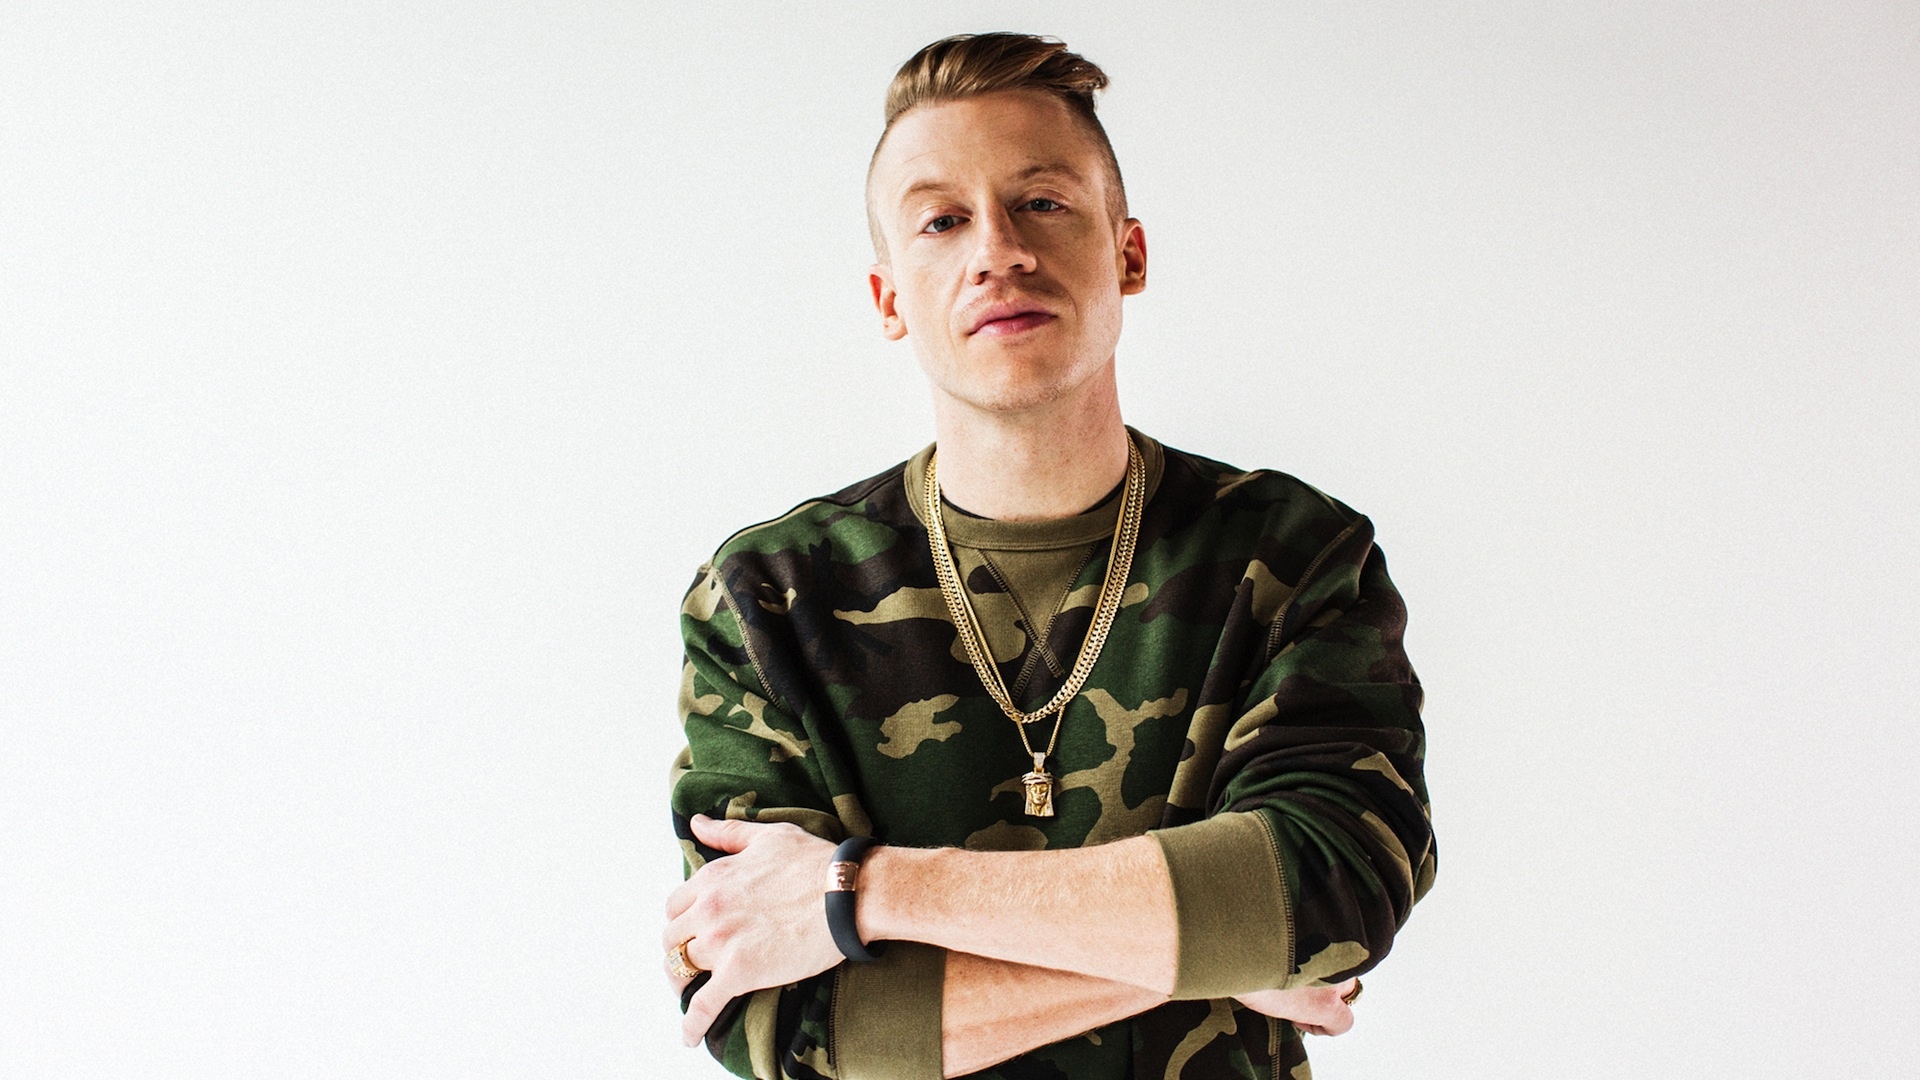 Macklemore car accident, Traffic collision, Road safety, Sobriety importance, 1920x1080 Full HD Desktop